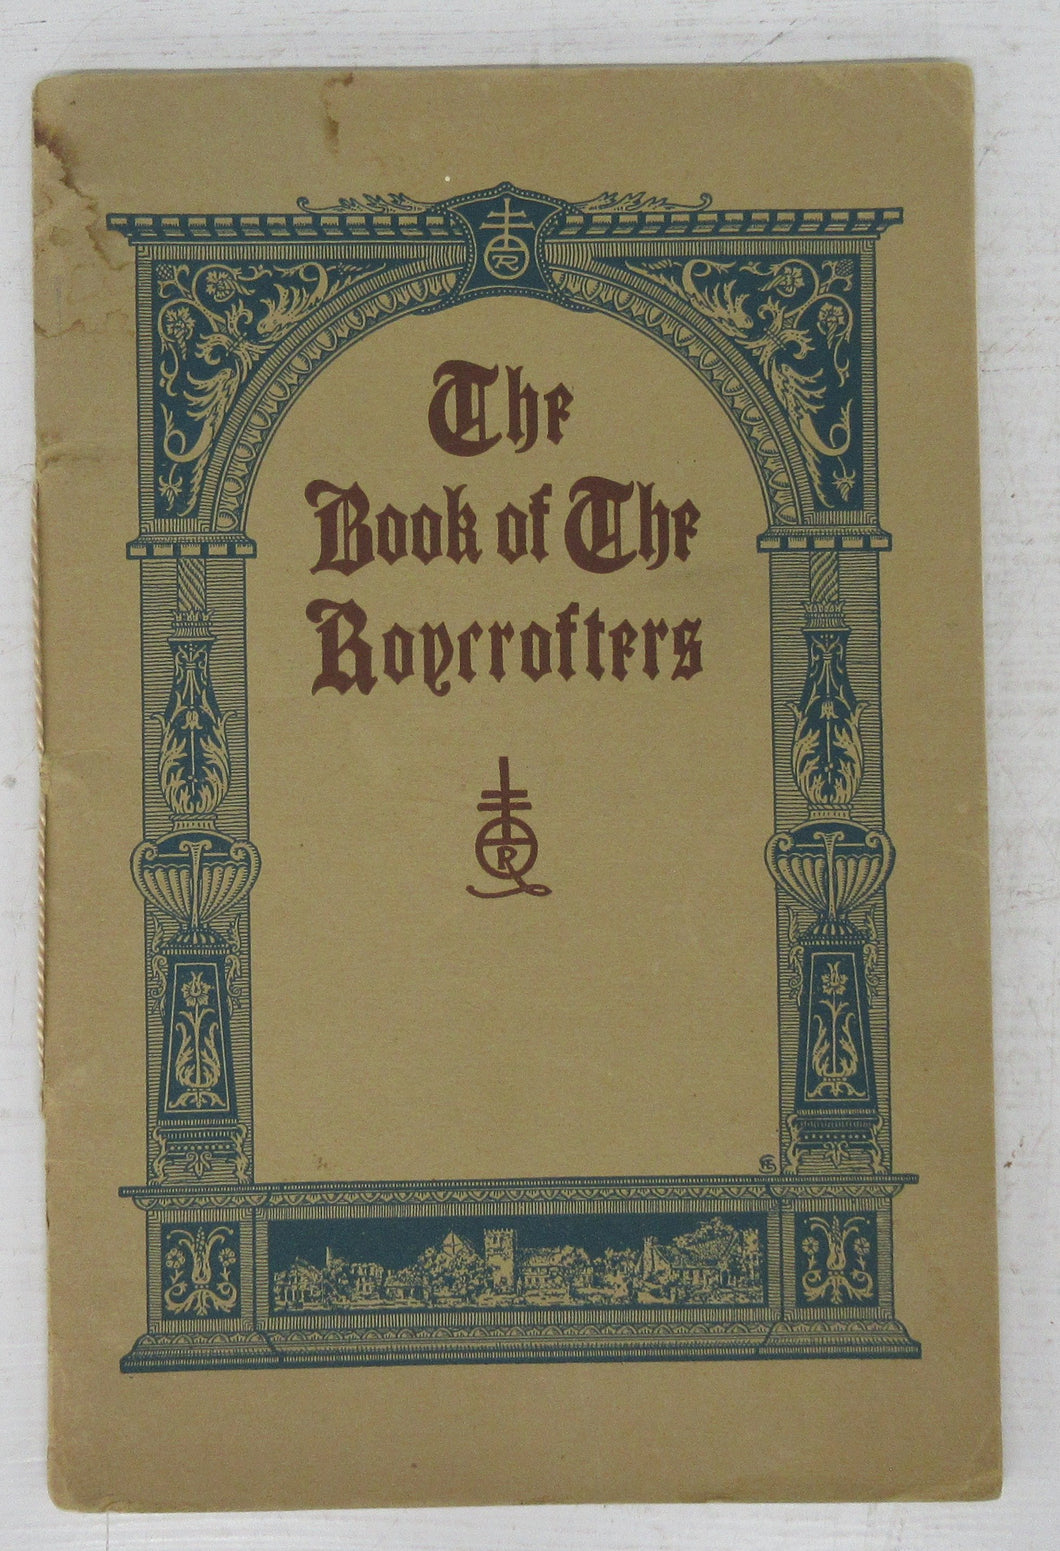 The Book of the Roycrofters: Being a History and Some Comments by Elbert Hubbard and Elbert Hubbard II